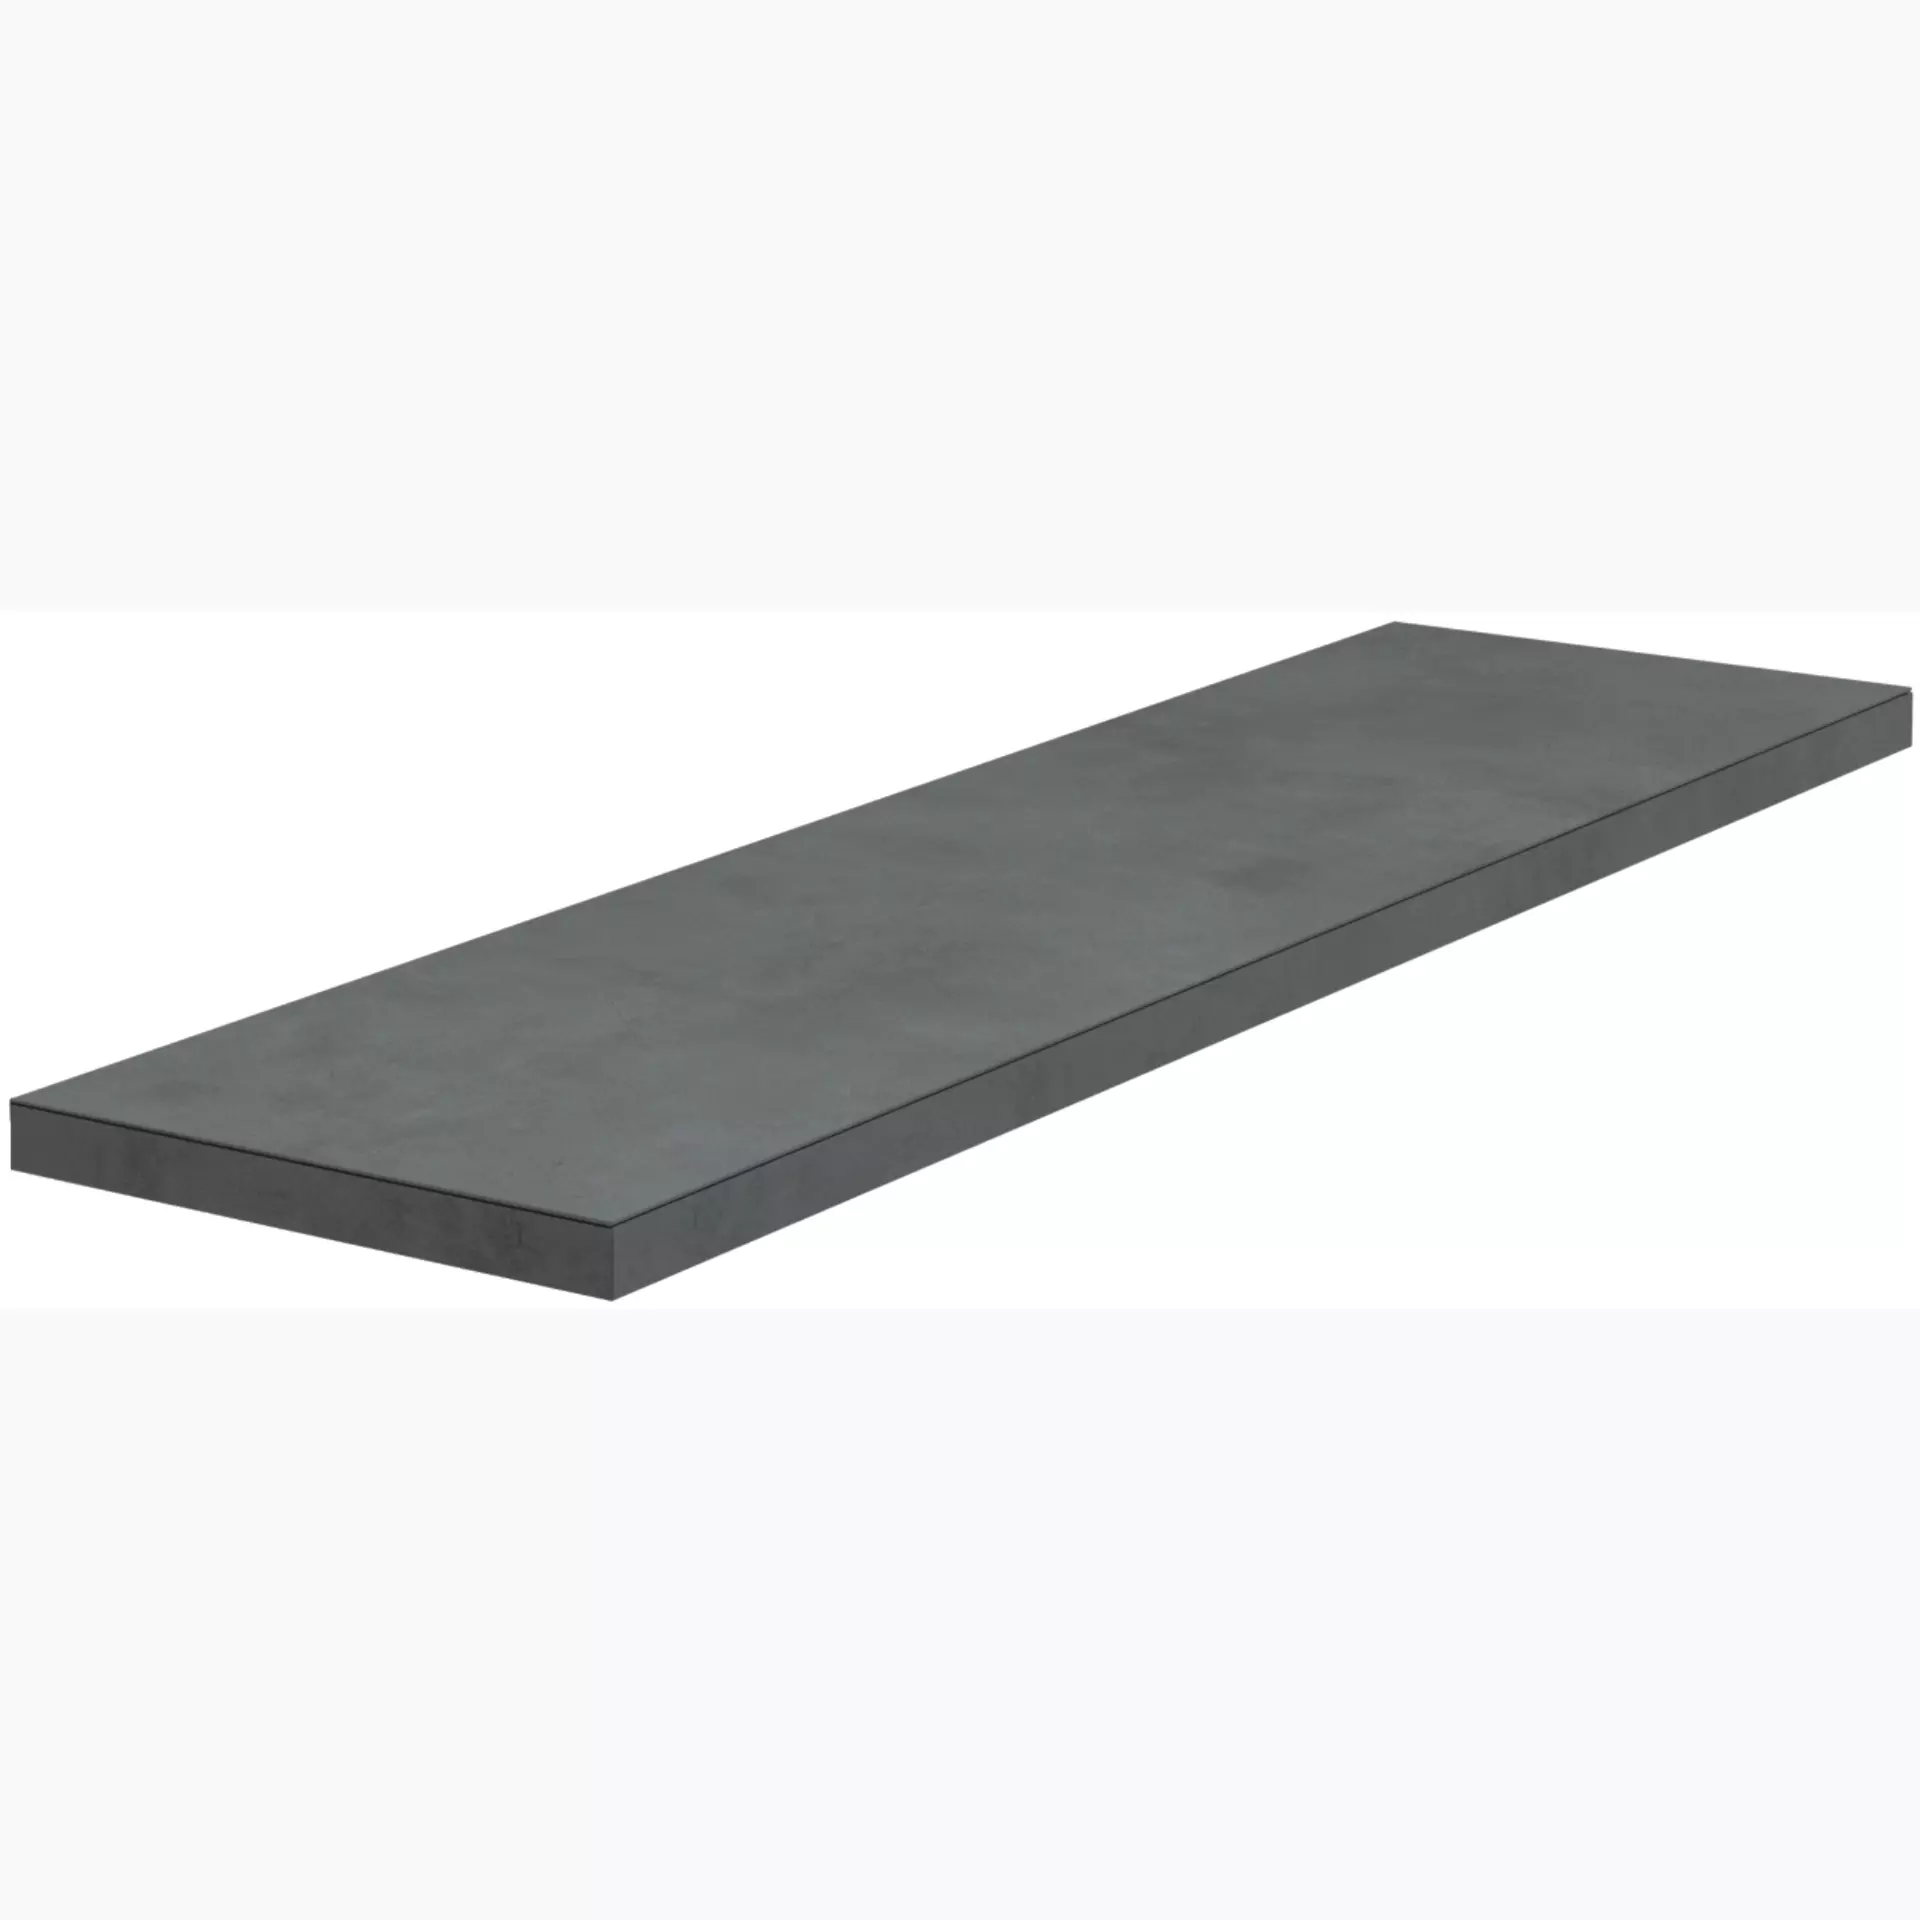 Del Conca Htl Timeline Nightfall Htl02 Naturale Corner plate Step Right G3TL02RGD12 33x120cm rectified 8,5mm